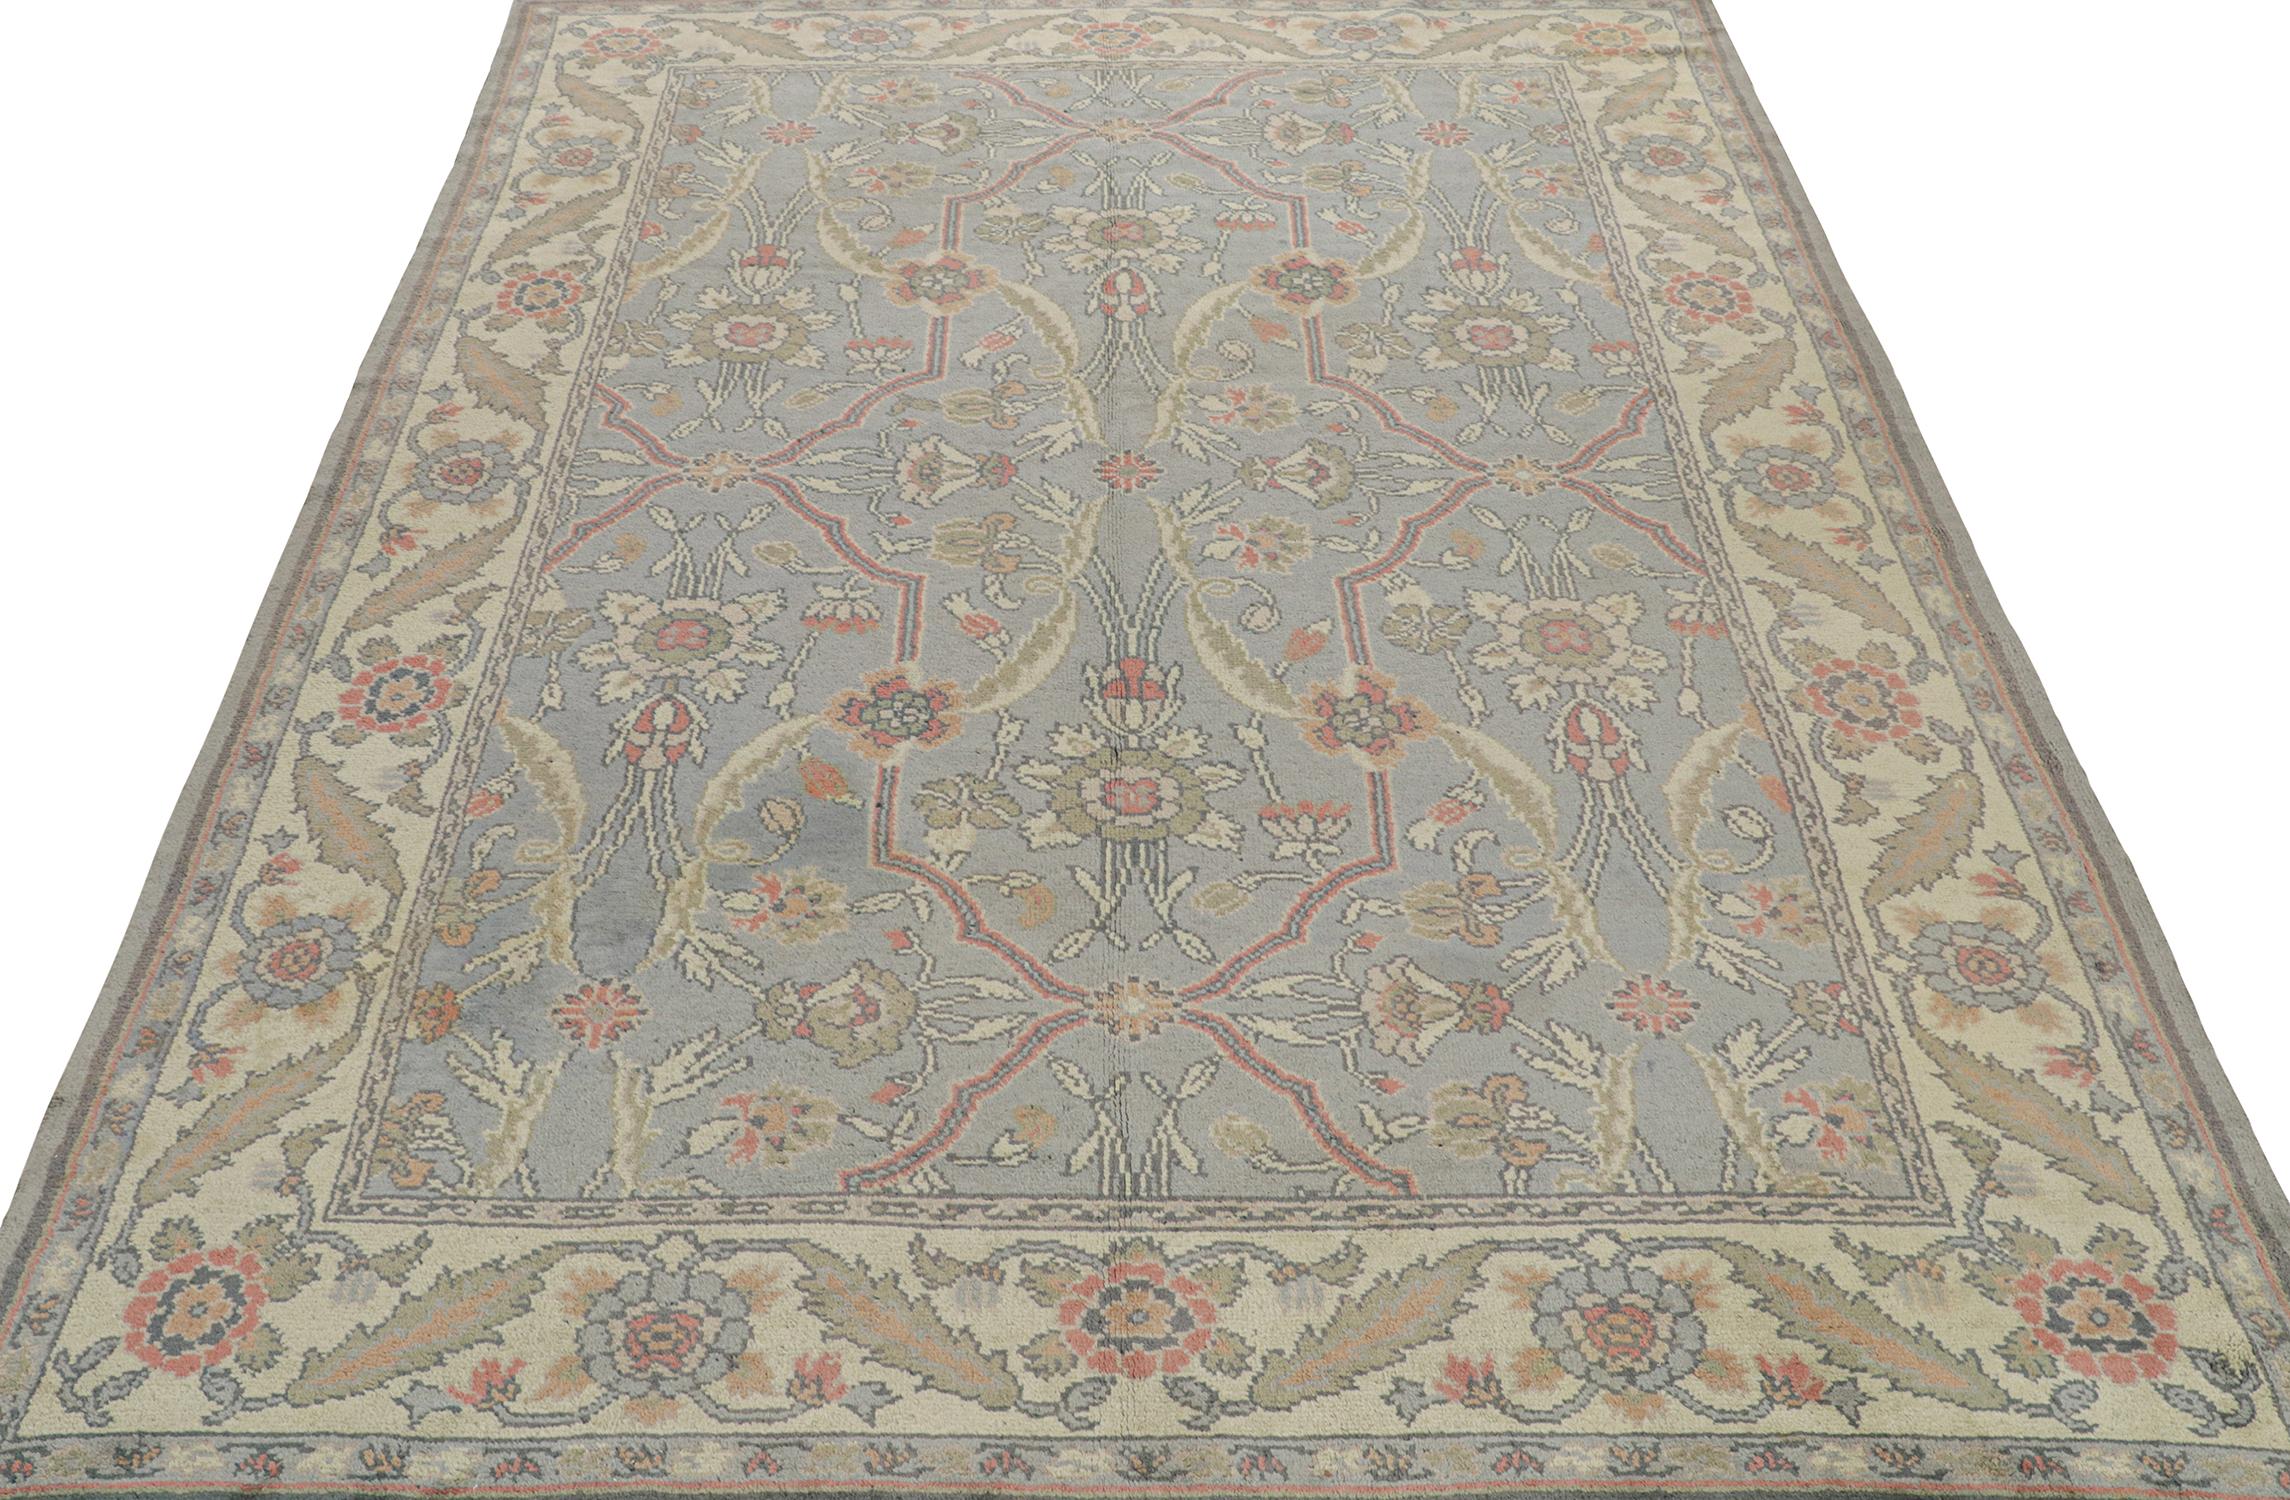 This antique 9x13 Arts & Crafts rug is a rare new Irish Donegal rug in our classic curations. Hand-knotted in wool circa 1920-1930.

Further on the Design: 

This masterpiece is one of the few of its kind Josh has curated, and it’s an exemplar of